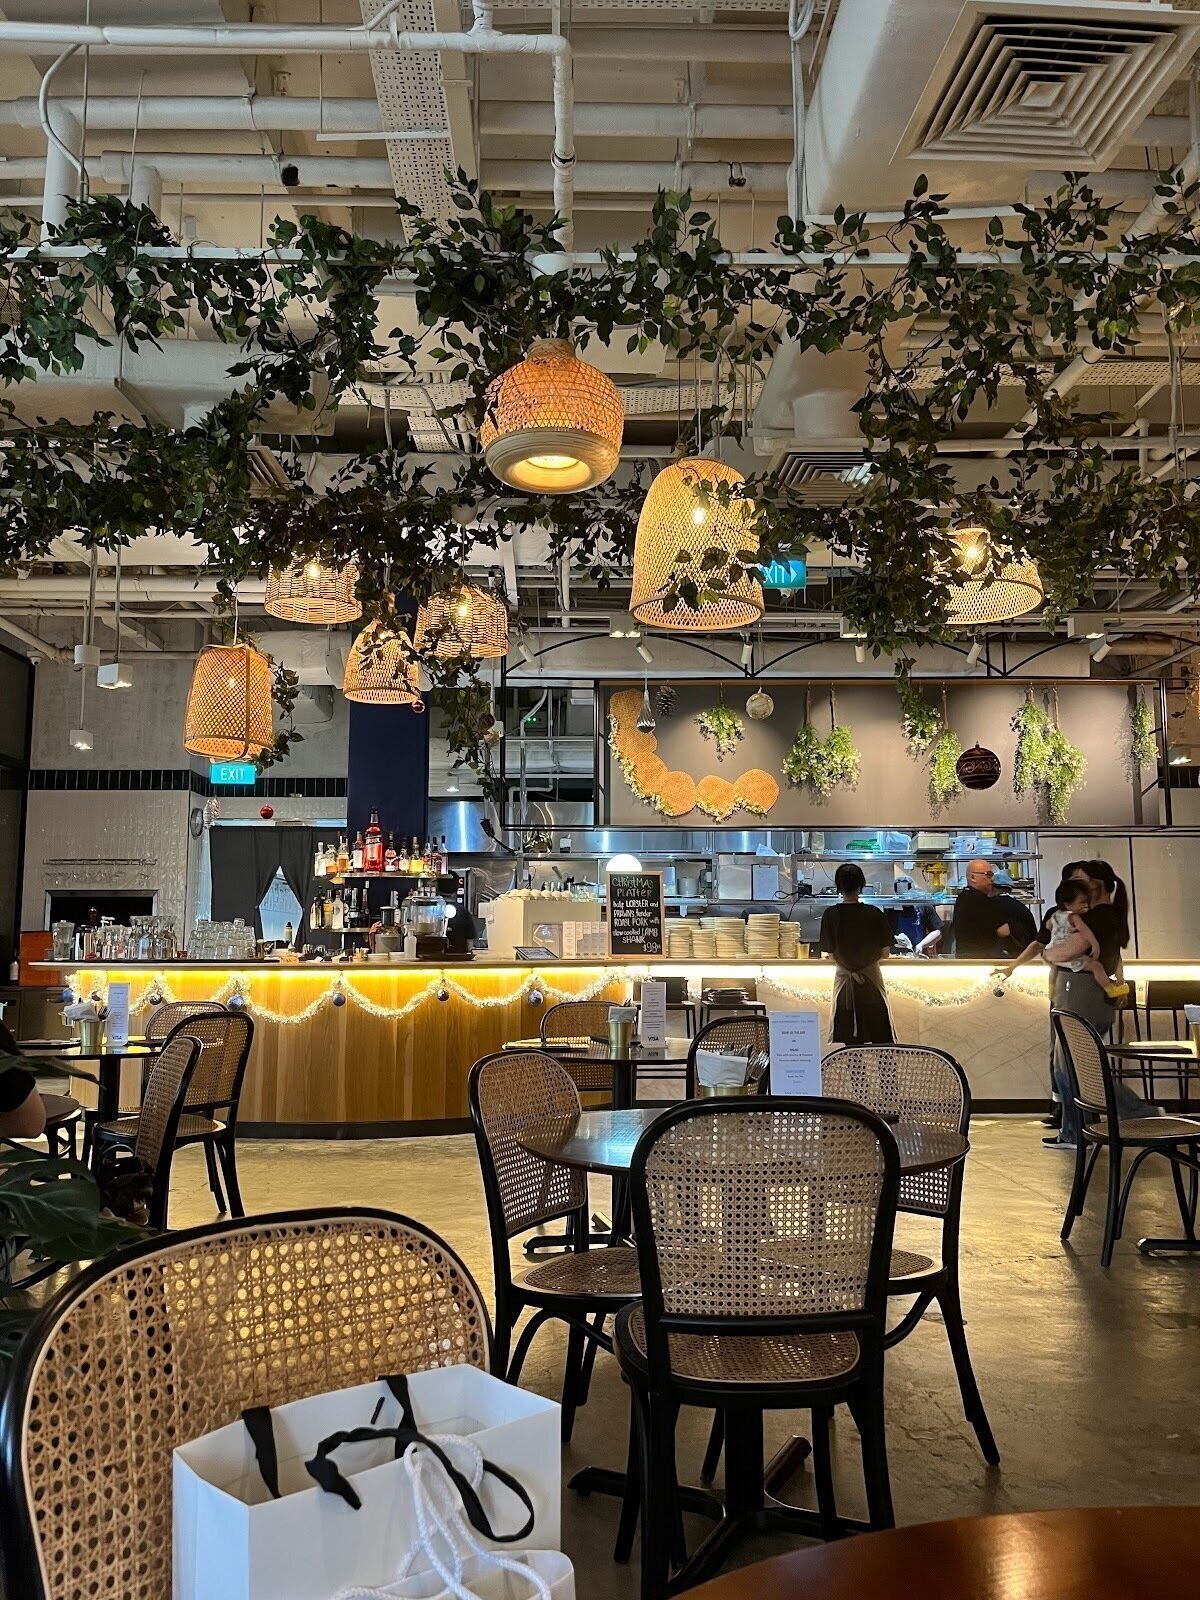 <span class="translation_missing" title="translation missing: en.meta.location_title, location_name: Bistro G, city: Singapore">Location Title</span>